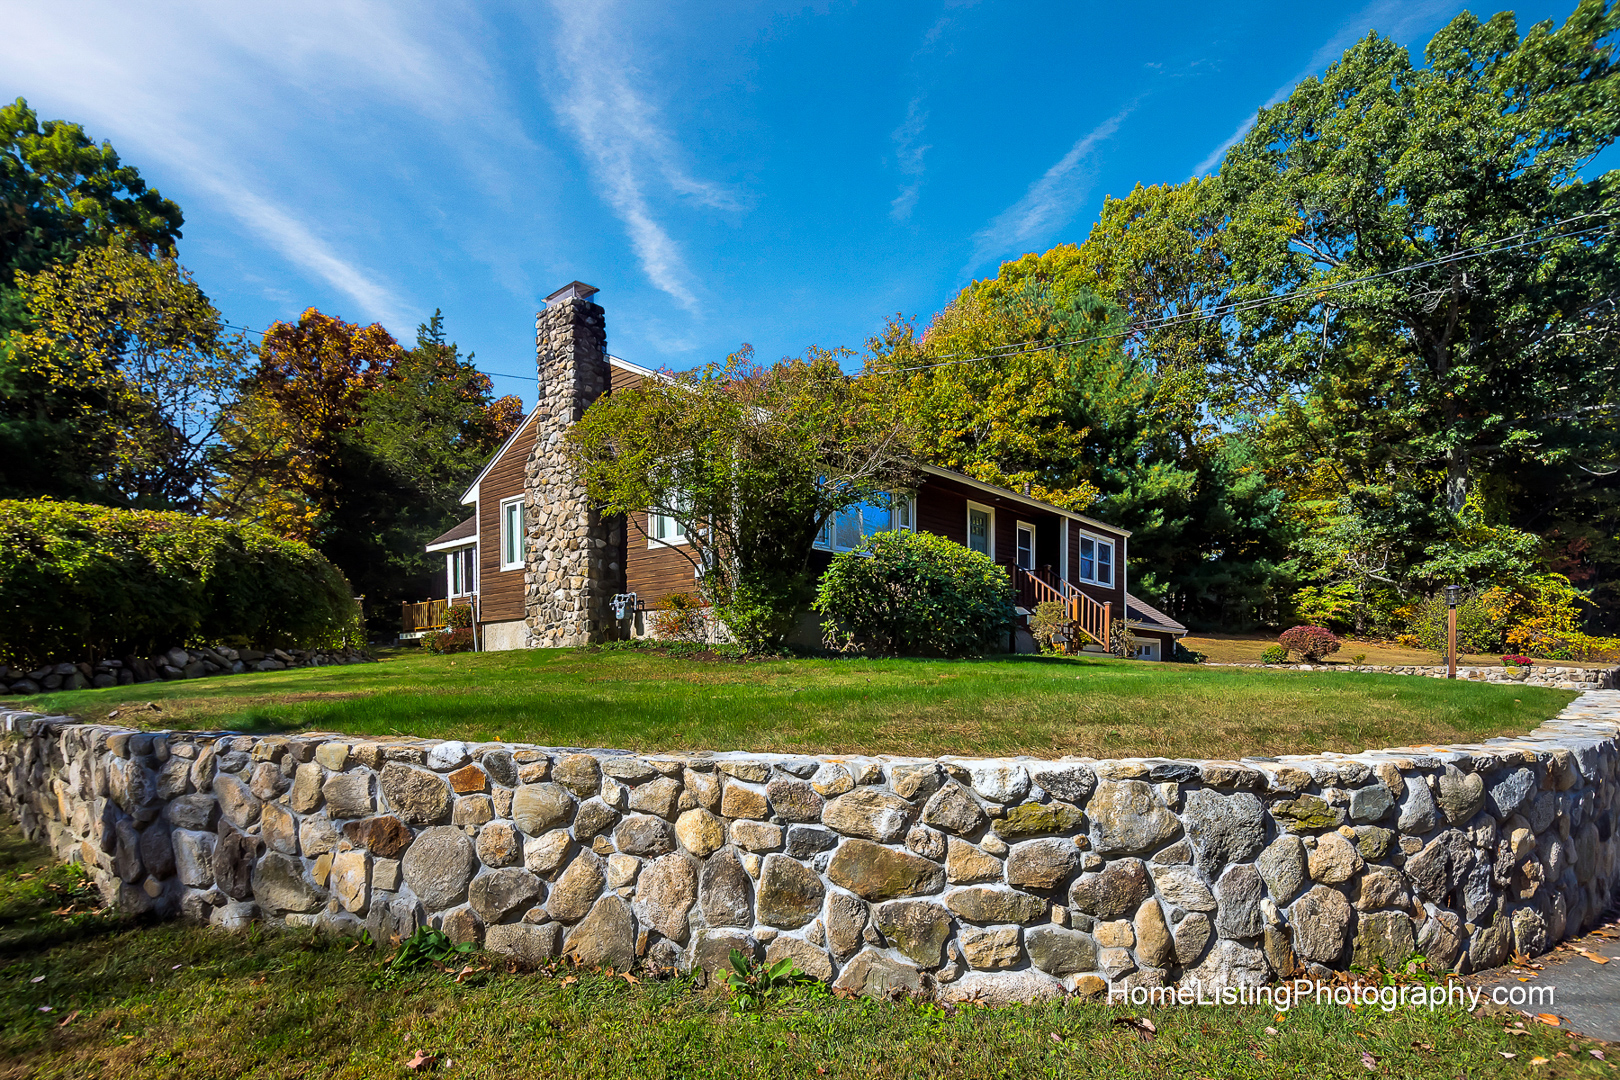 Thomas Adach - Bedford MA professional real estate photographer - 508-655-2225 Home Listing Photography